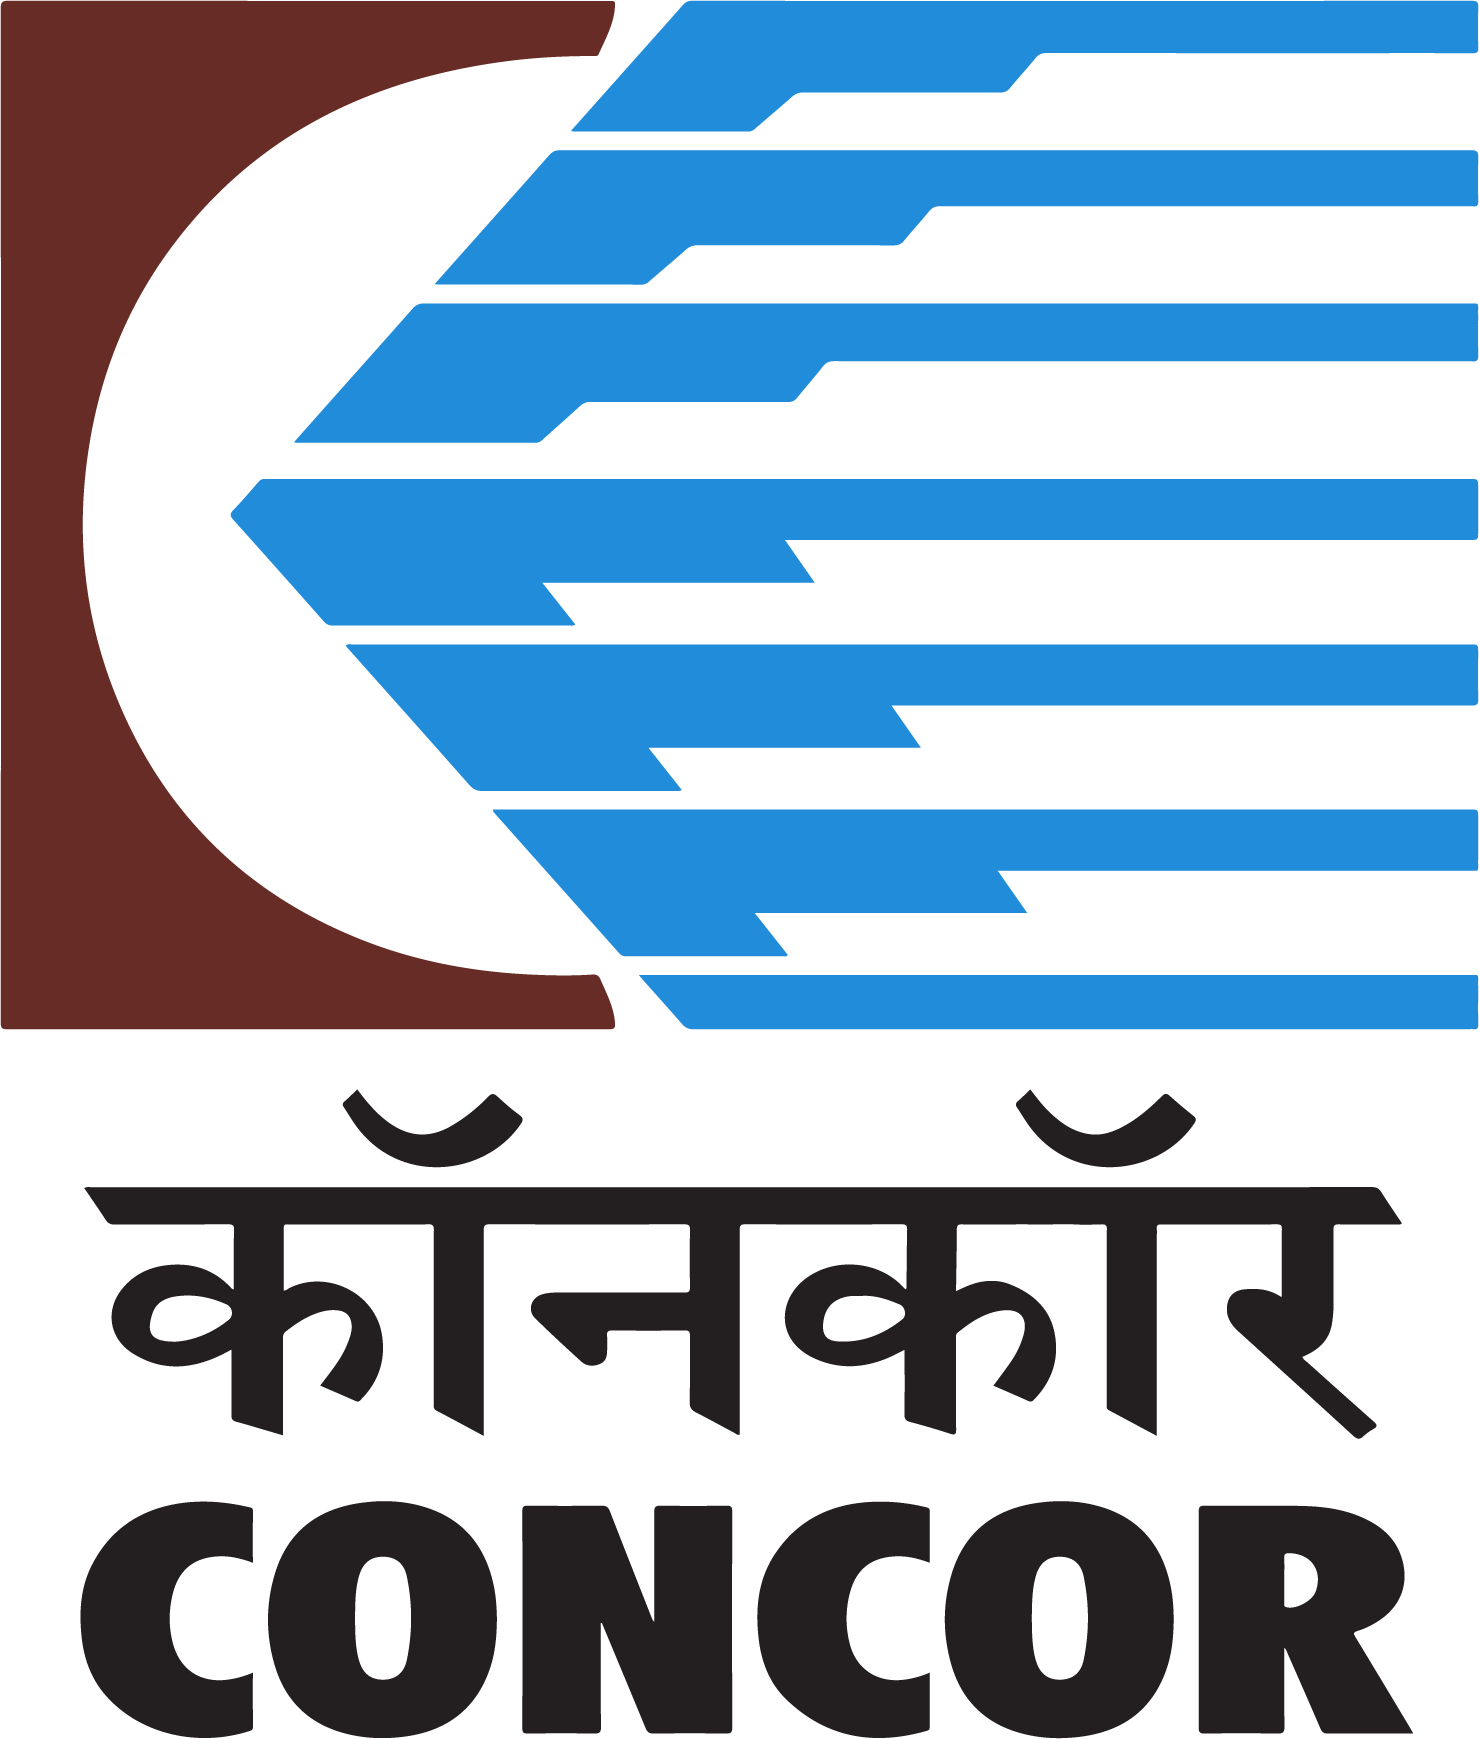 Container Corporation of India logo large (transparent PNG)